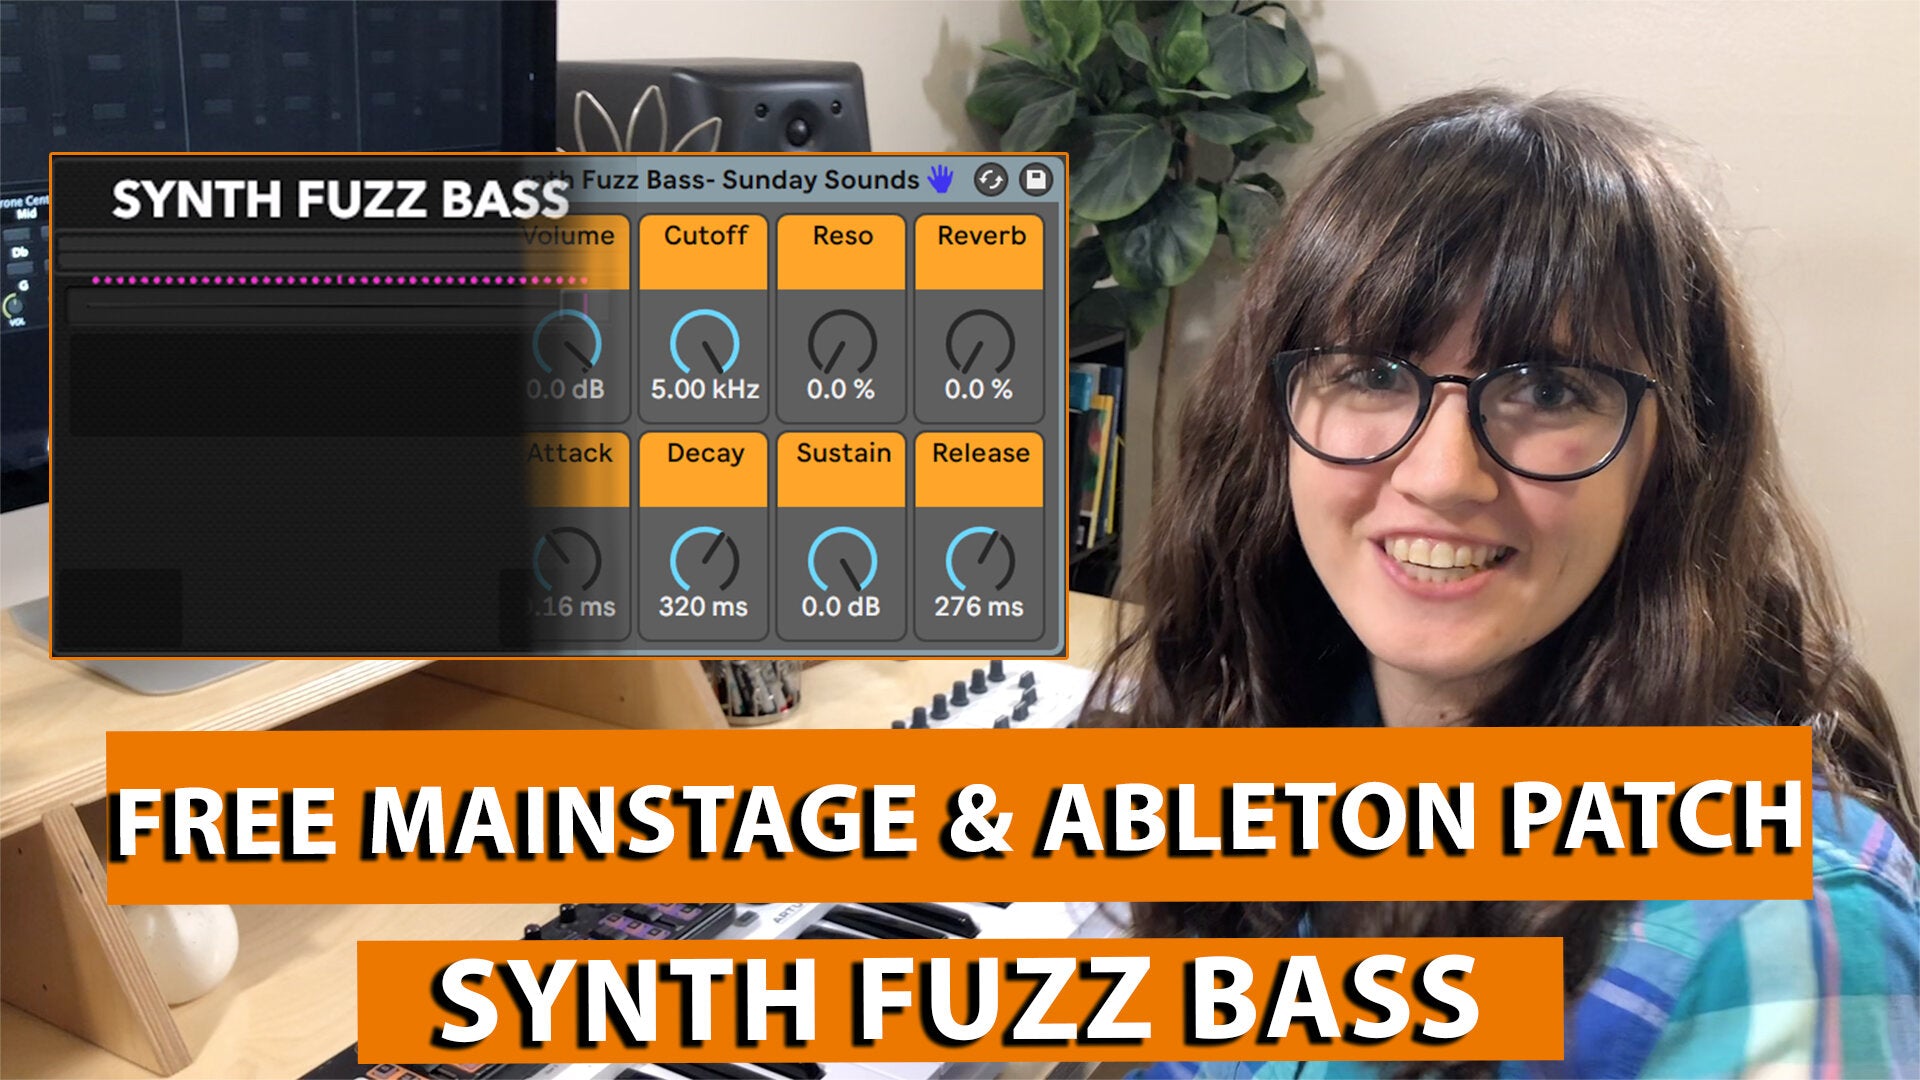 Free MainStage & Ableton Worship Patch! - Synth Fuzz Bass